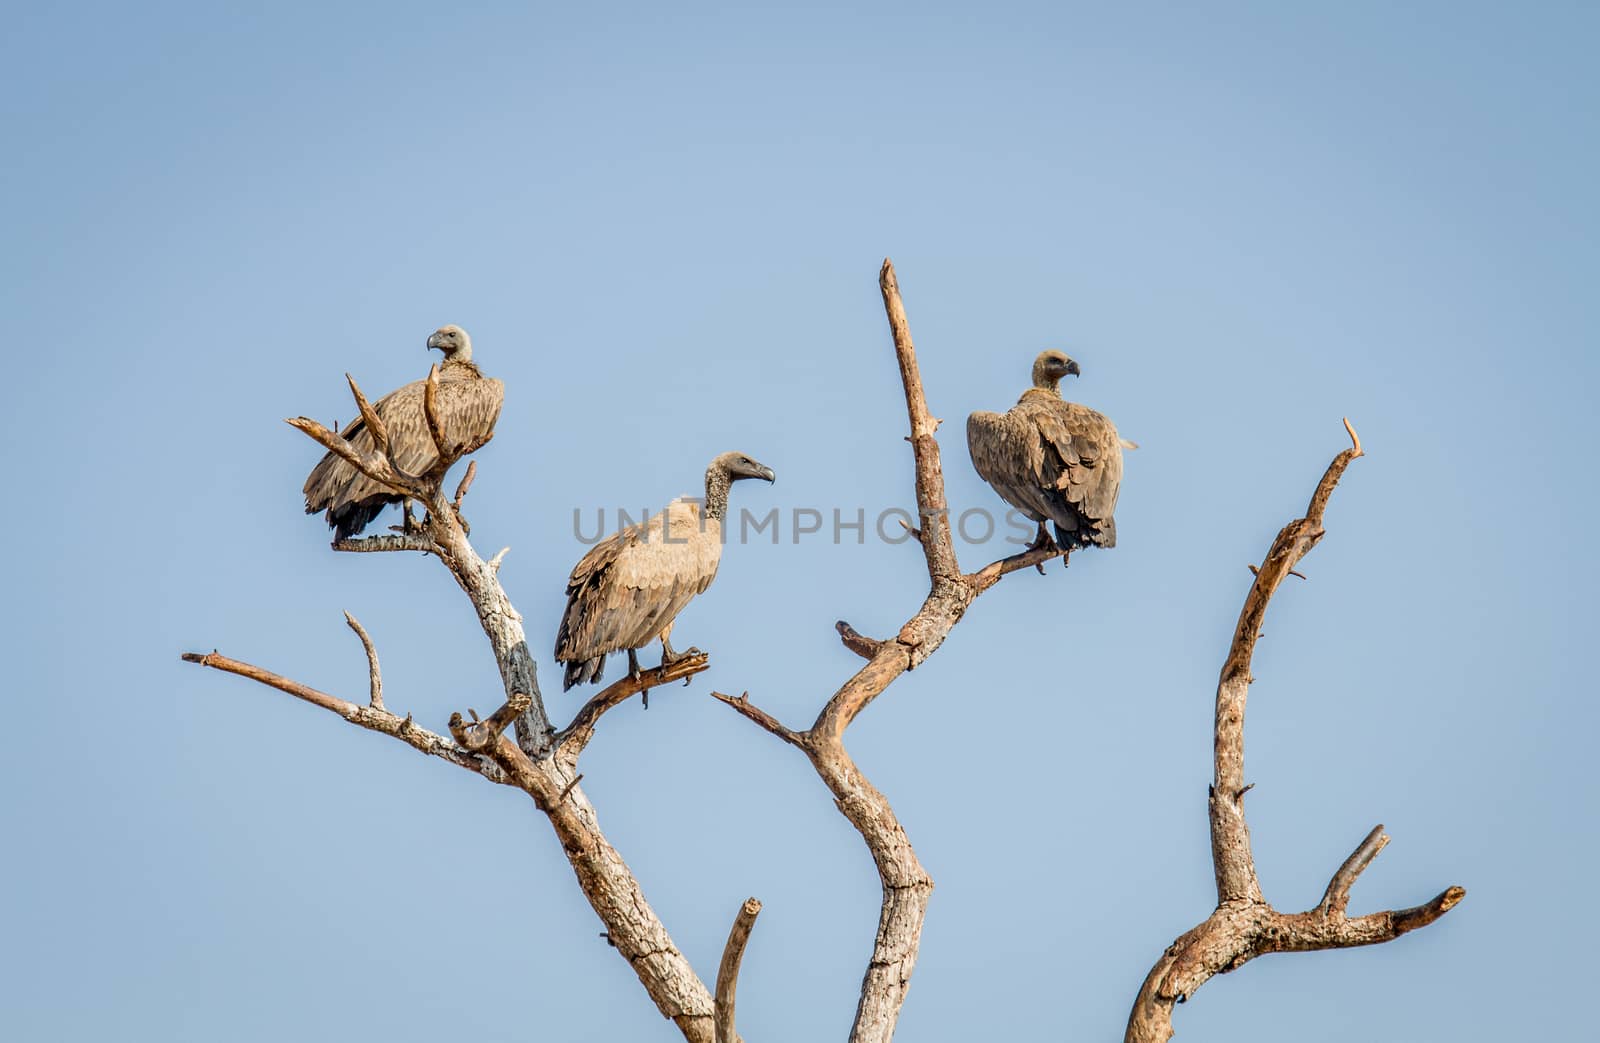 White-backed Vultures in a tree in the Kruger National Park by Simoneemanphotography